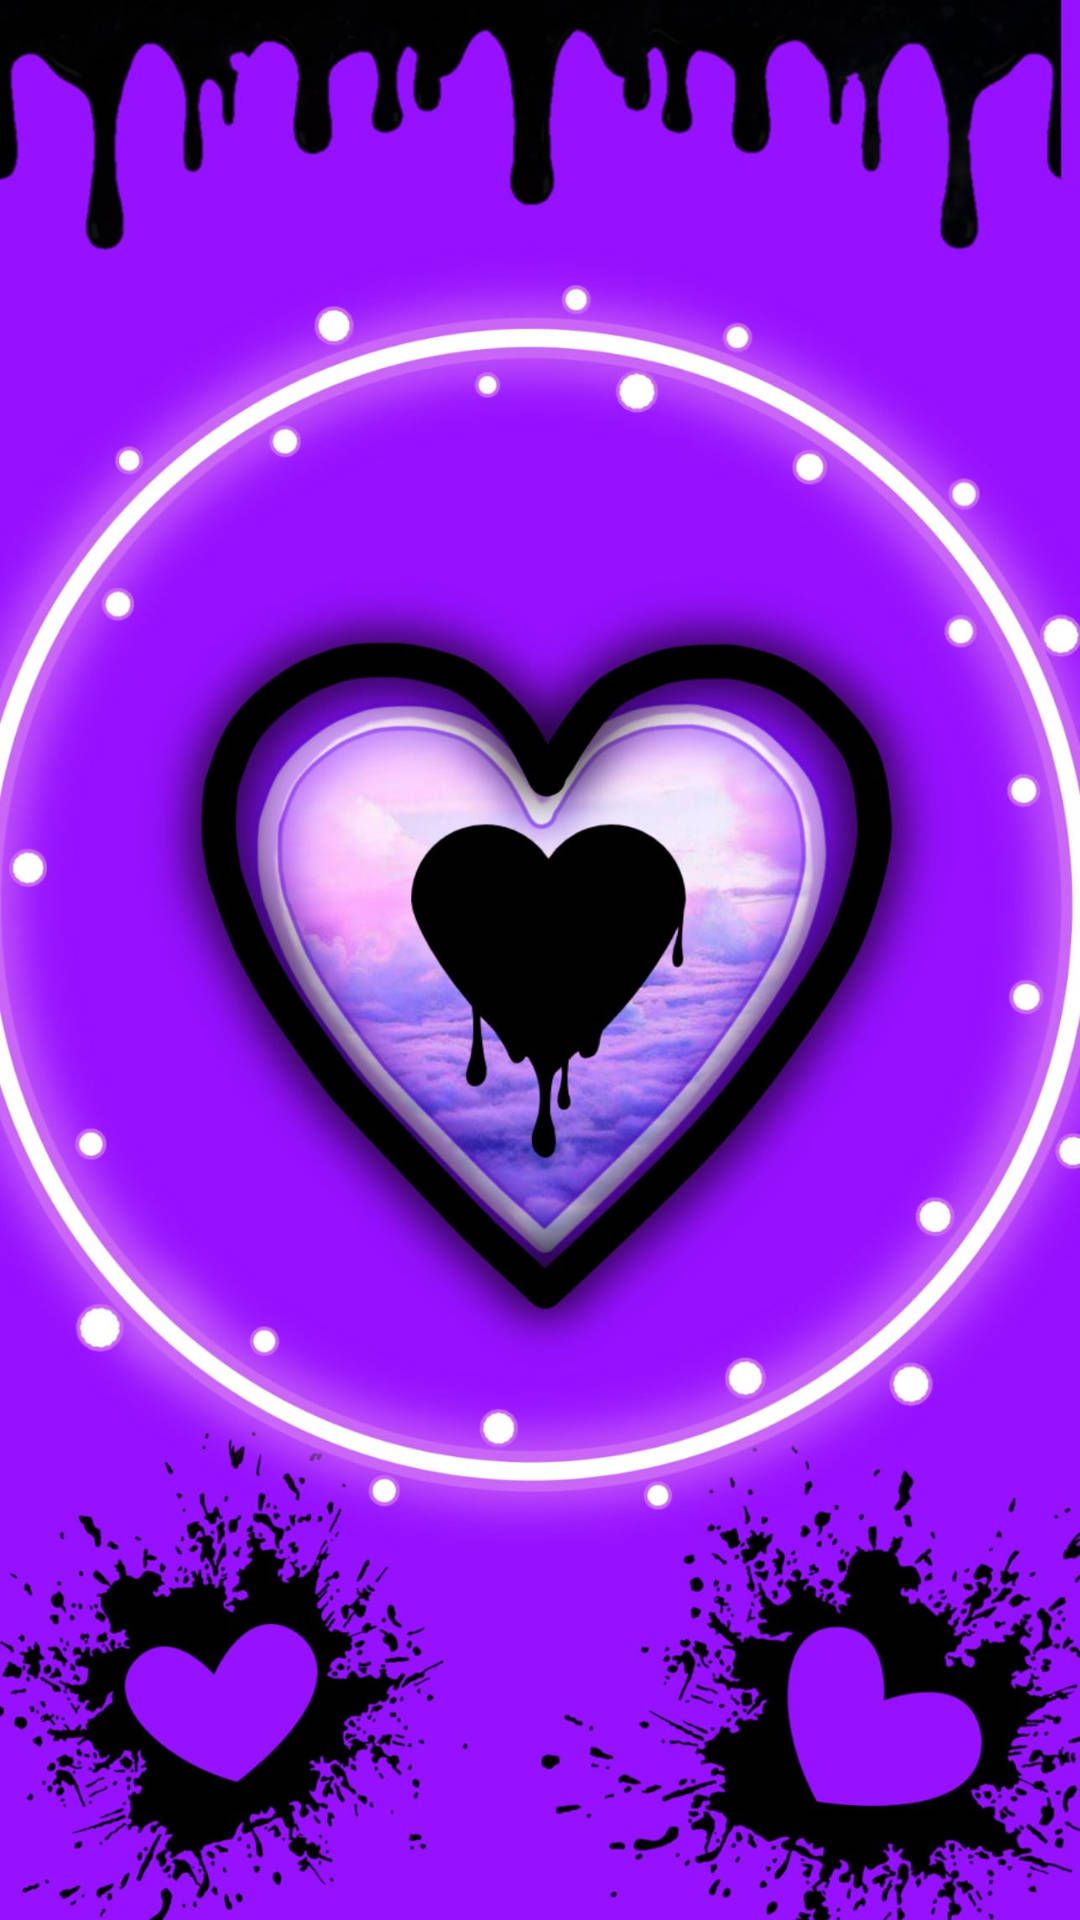 A purple heart with two hearts and some paint - Dark purple